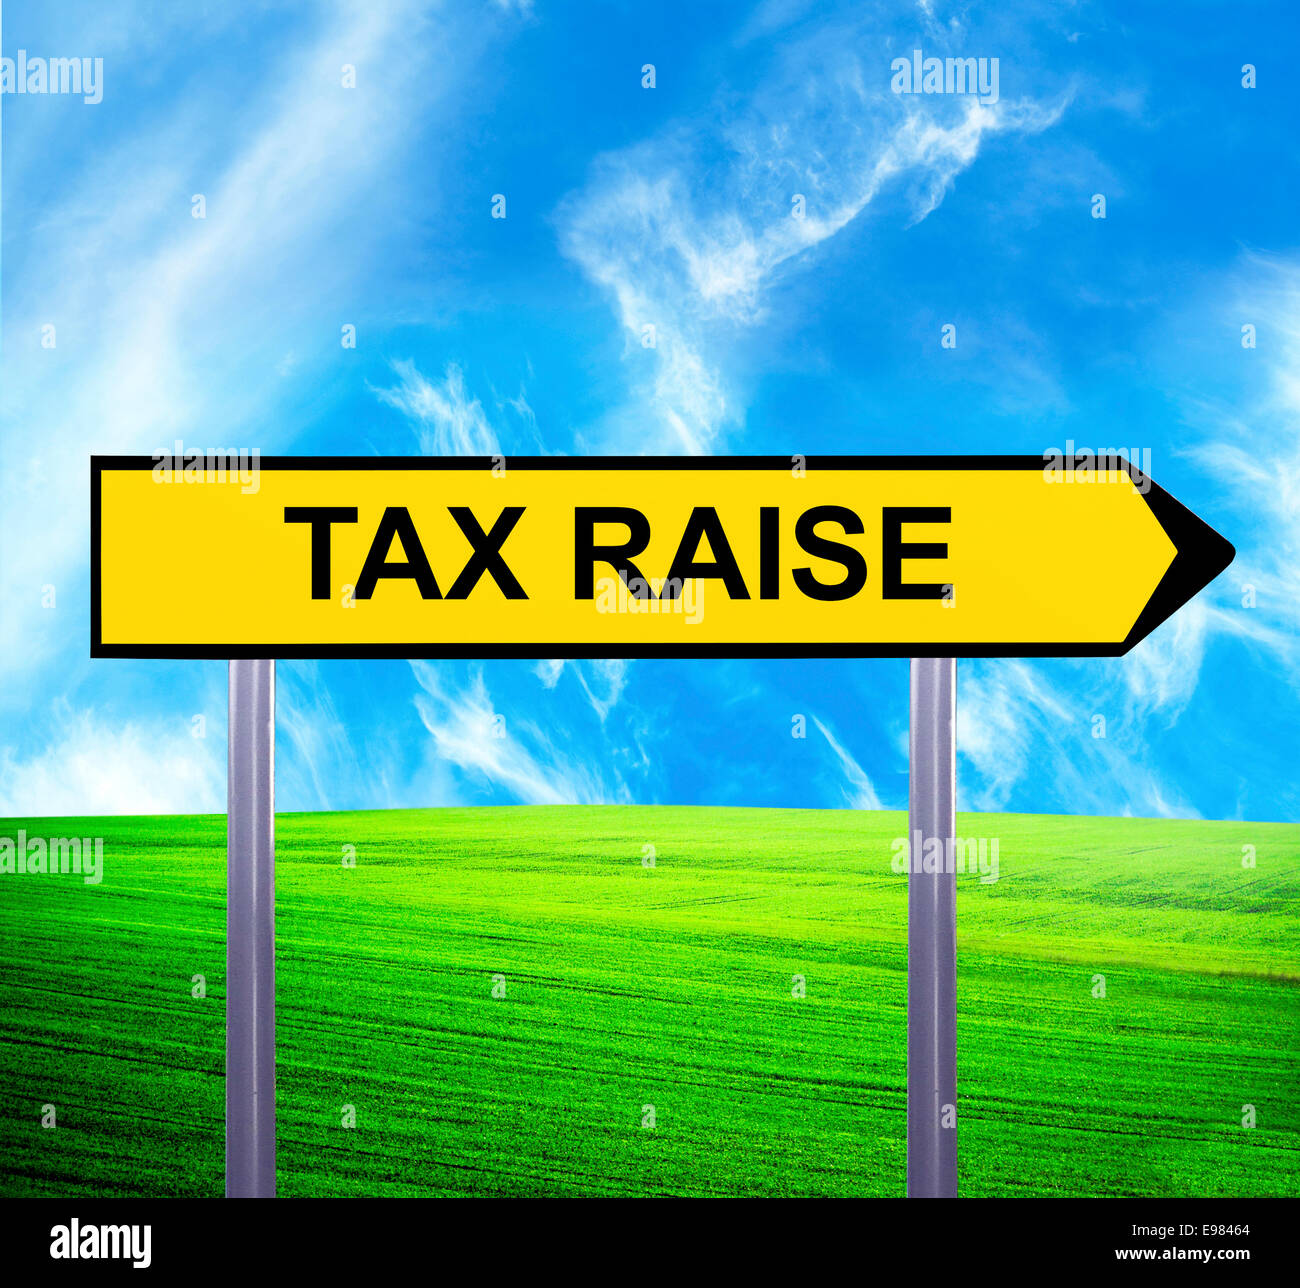 Conceptual arrow sign against beautiful landscape with text - TAX RAISE Stock Photo